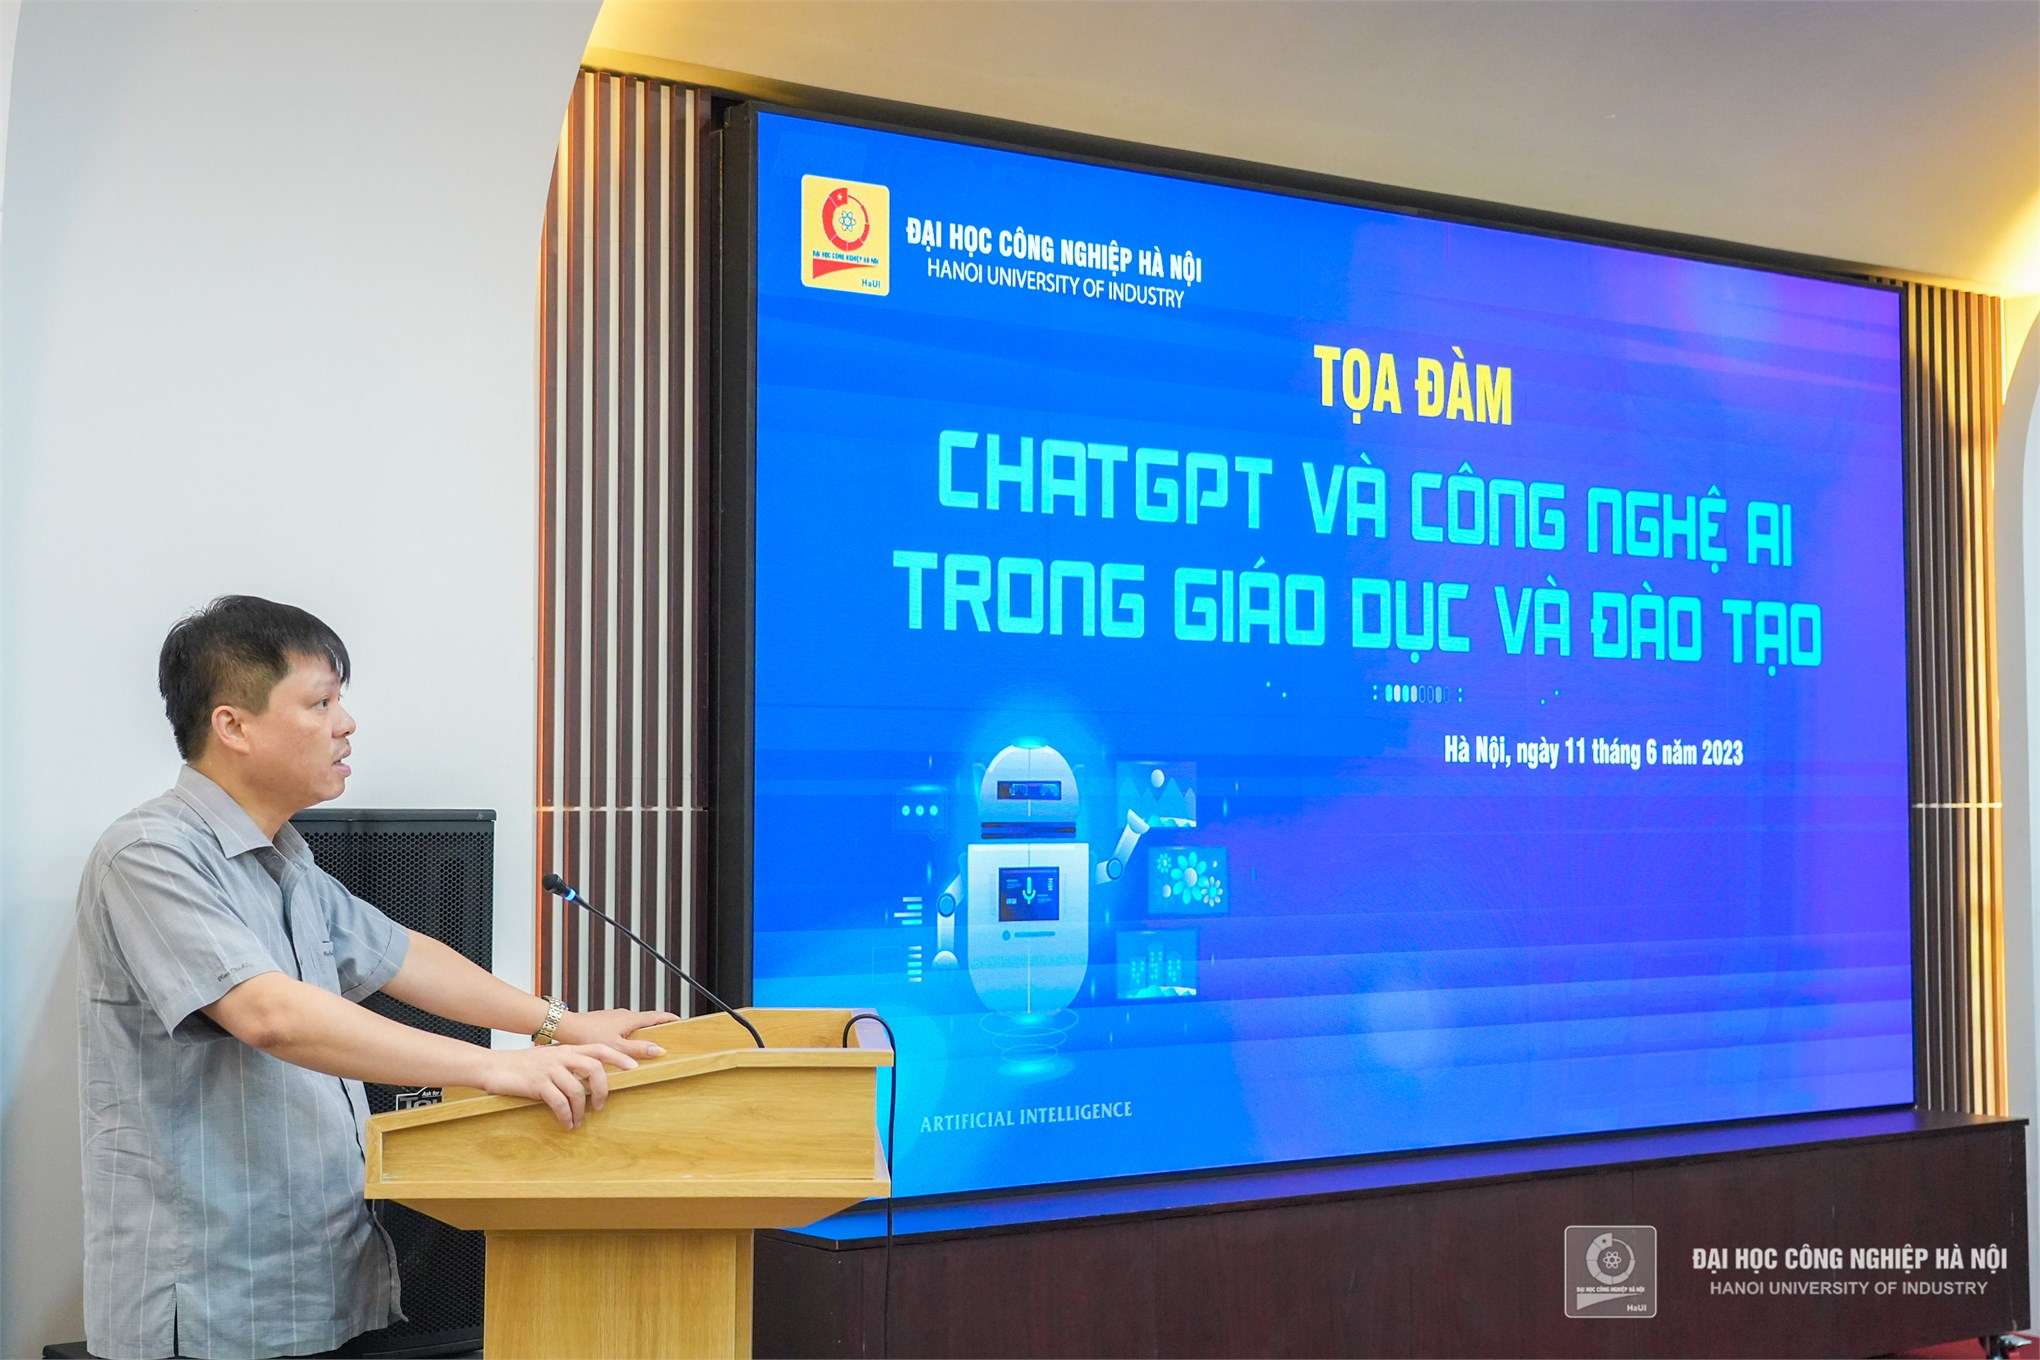 Seminar: ChatGPT and AI technology in education and training